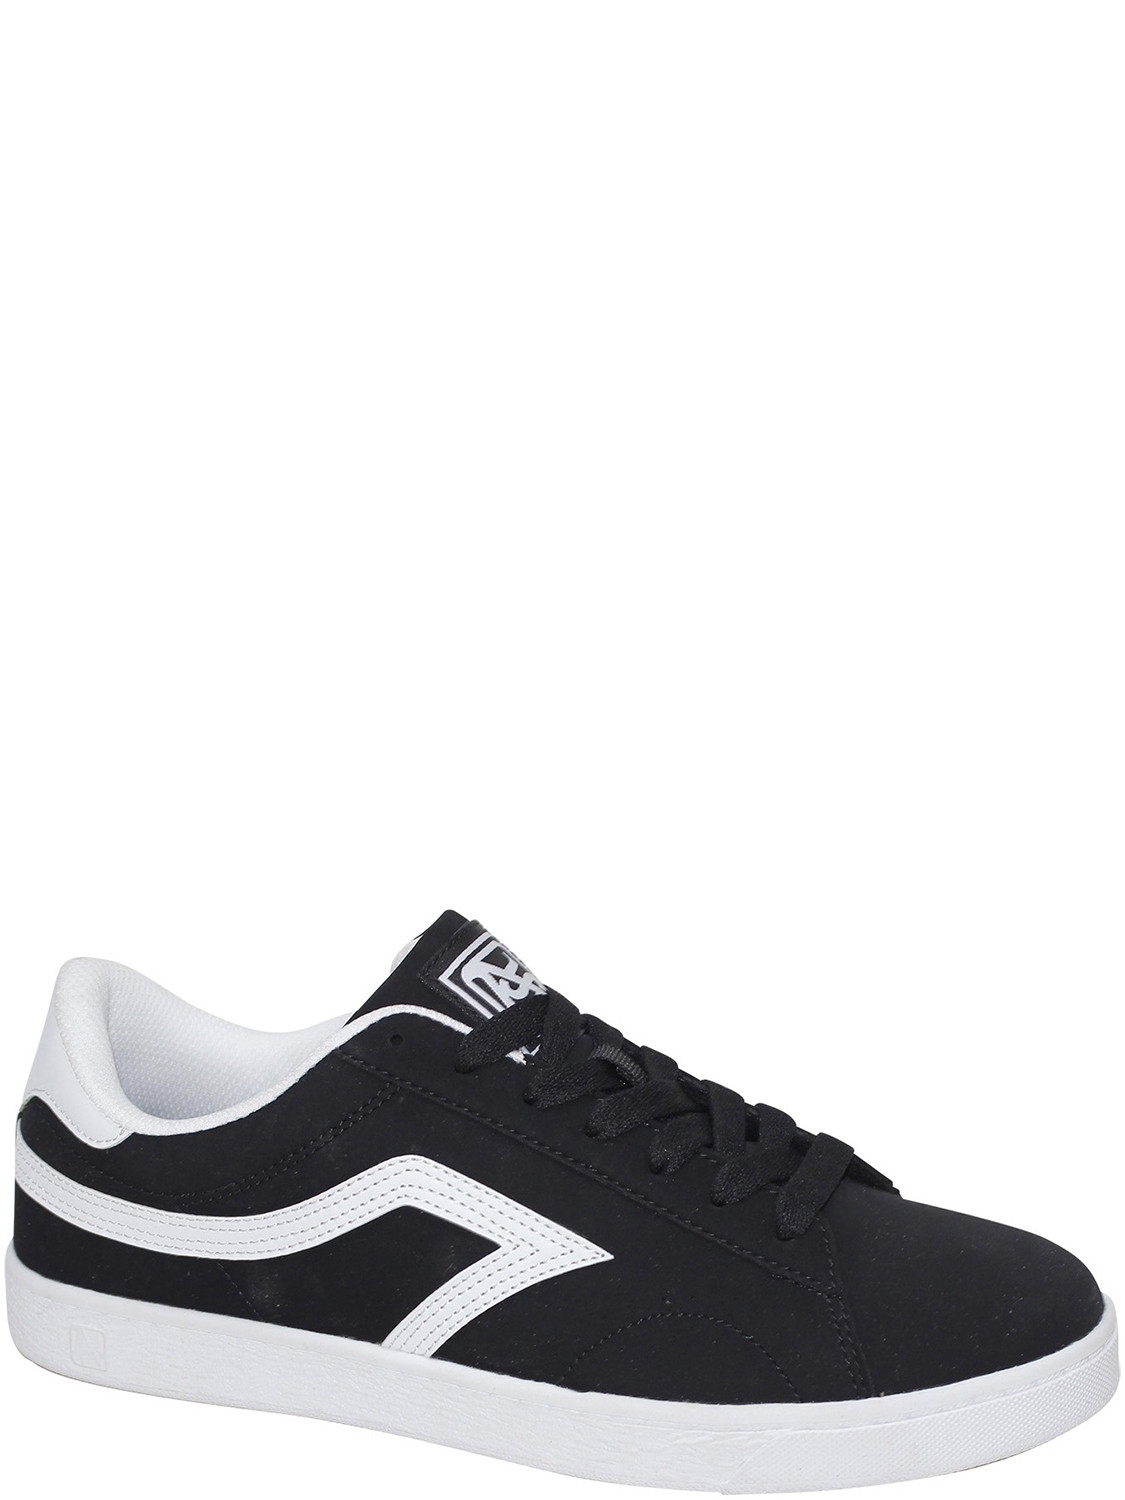 Airspeed Boys' Casual Court Sneaker - image 1 of 6